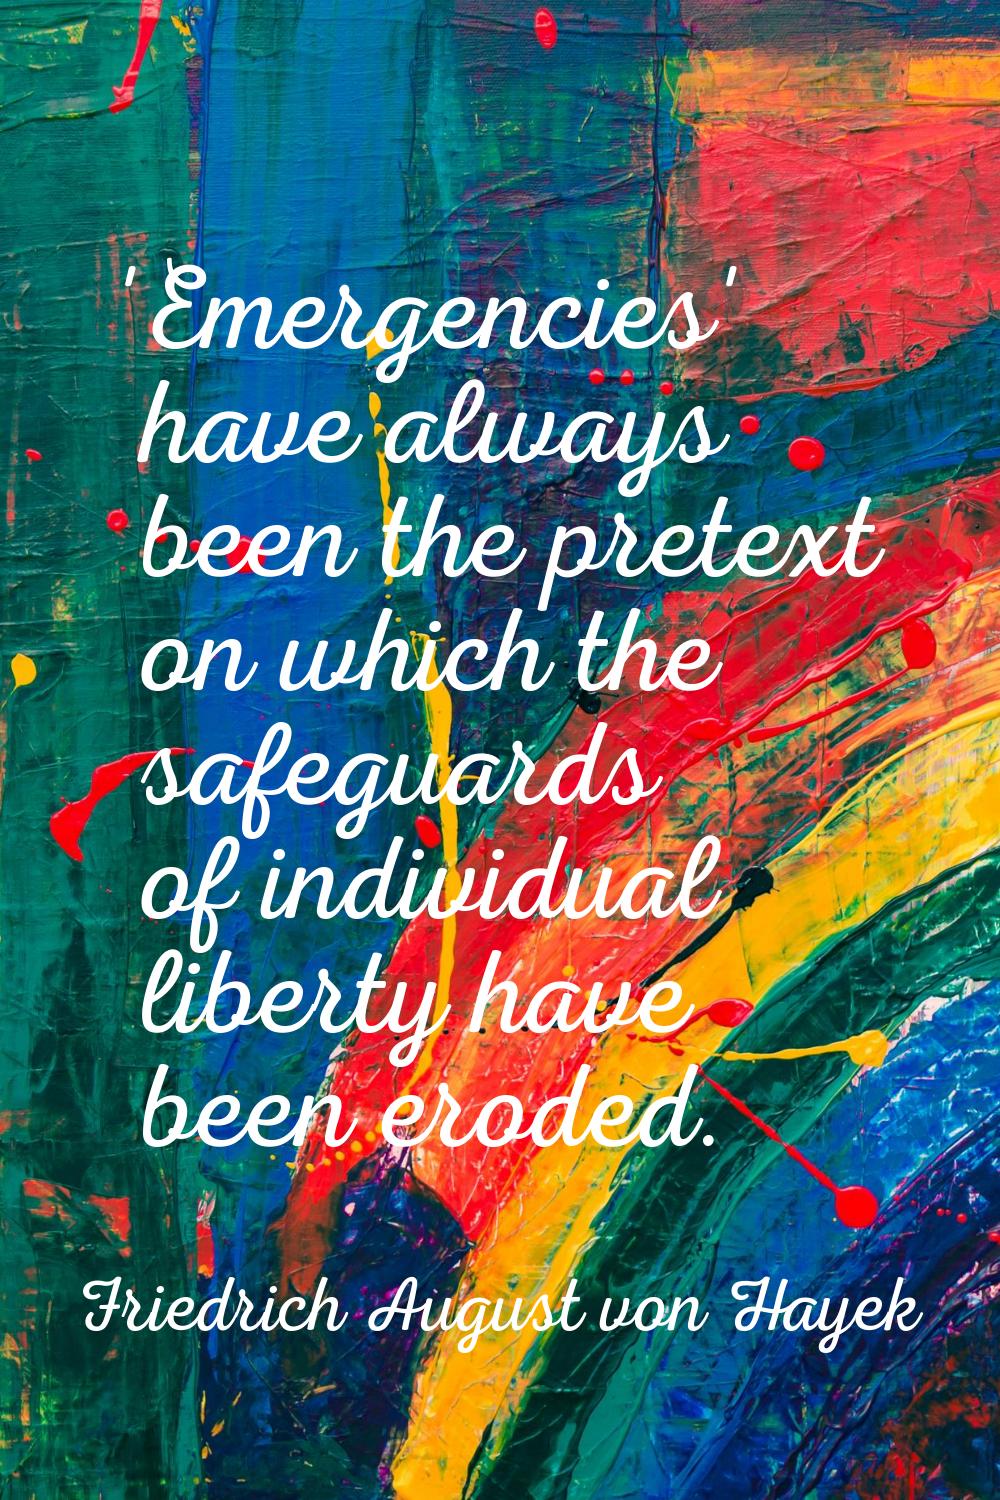 'Emergencies' have always been the pretext on which the safeguards of individual liberty have been 